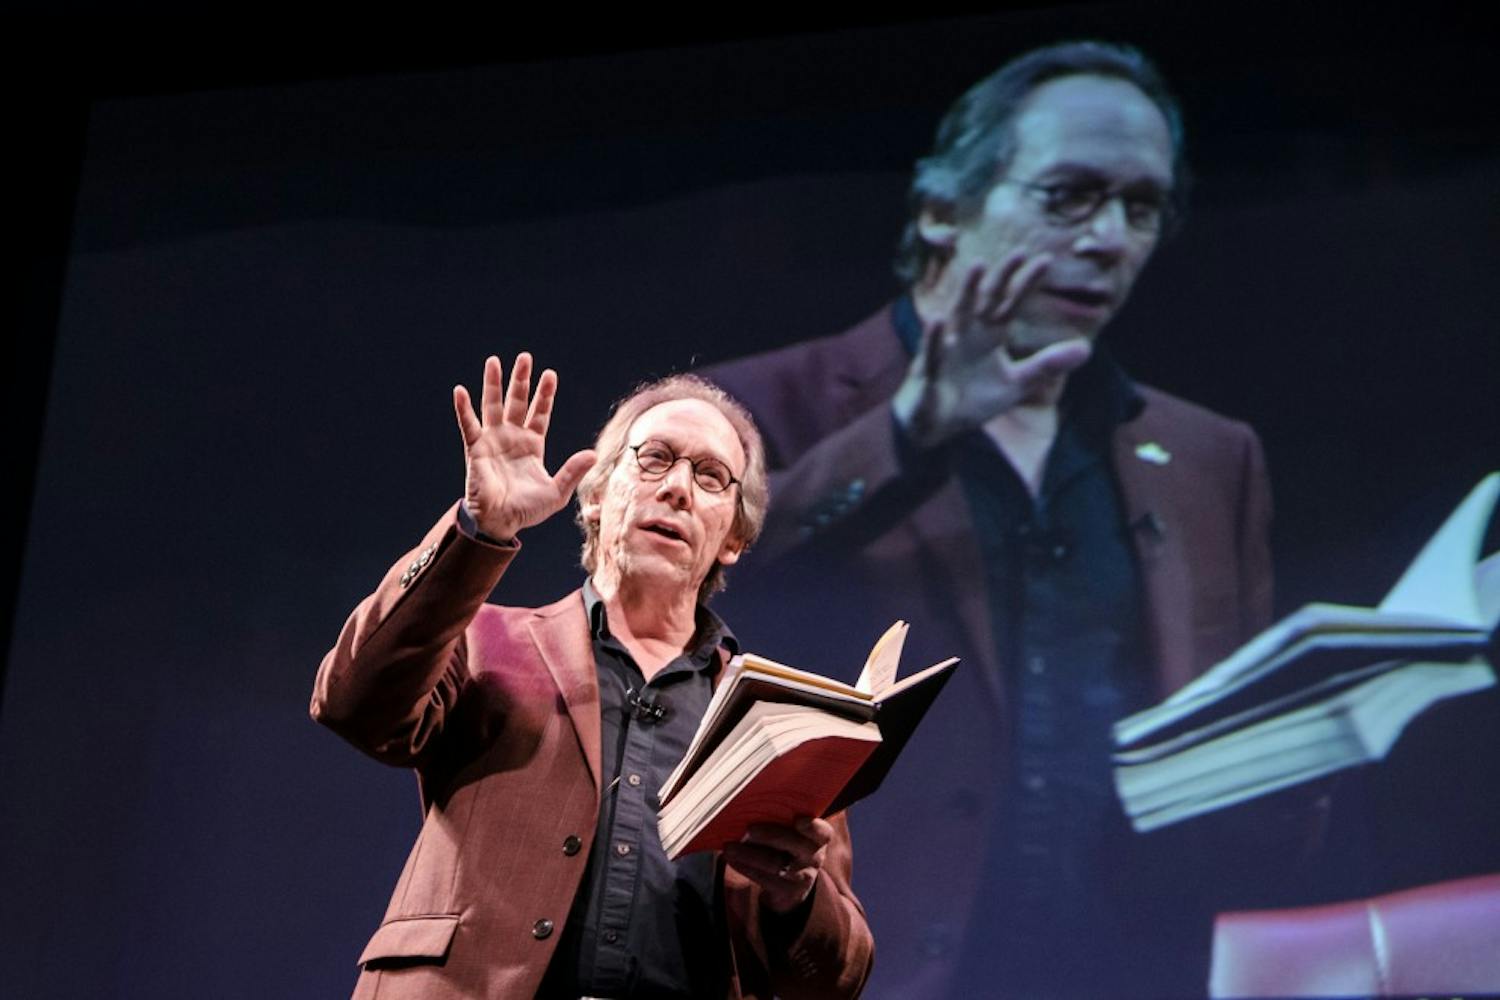 Lawrence Krauss, founder of the ASU School of Earth and Space Exploration, speaks at an Origin Projects event at the Orpheum Theater on Oct. 19, 2016. The ASU Origins Projects brings together experts to publicly discuss a wide range of cultural and scientific topics.